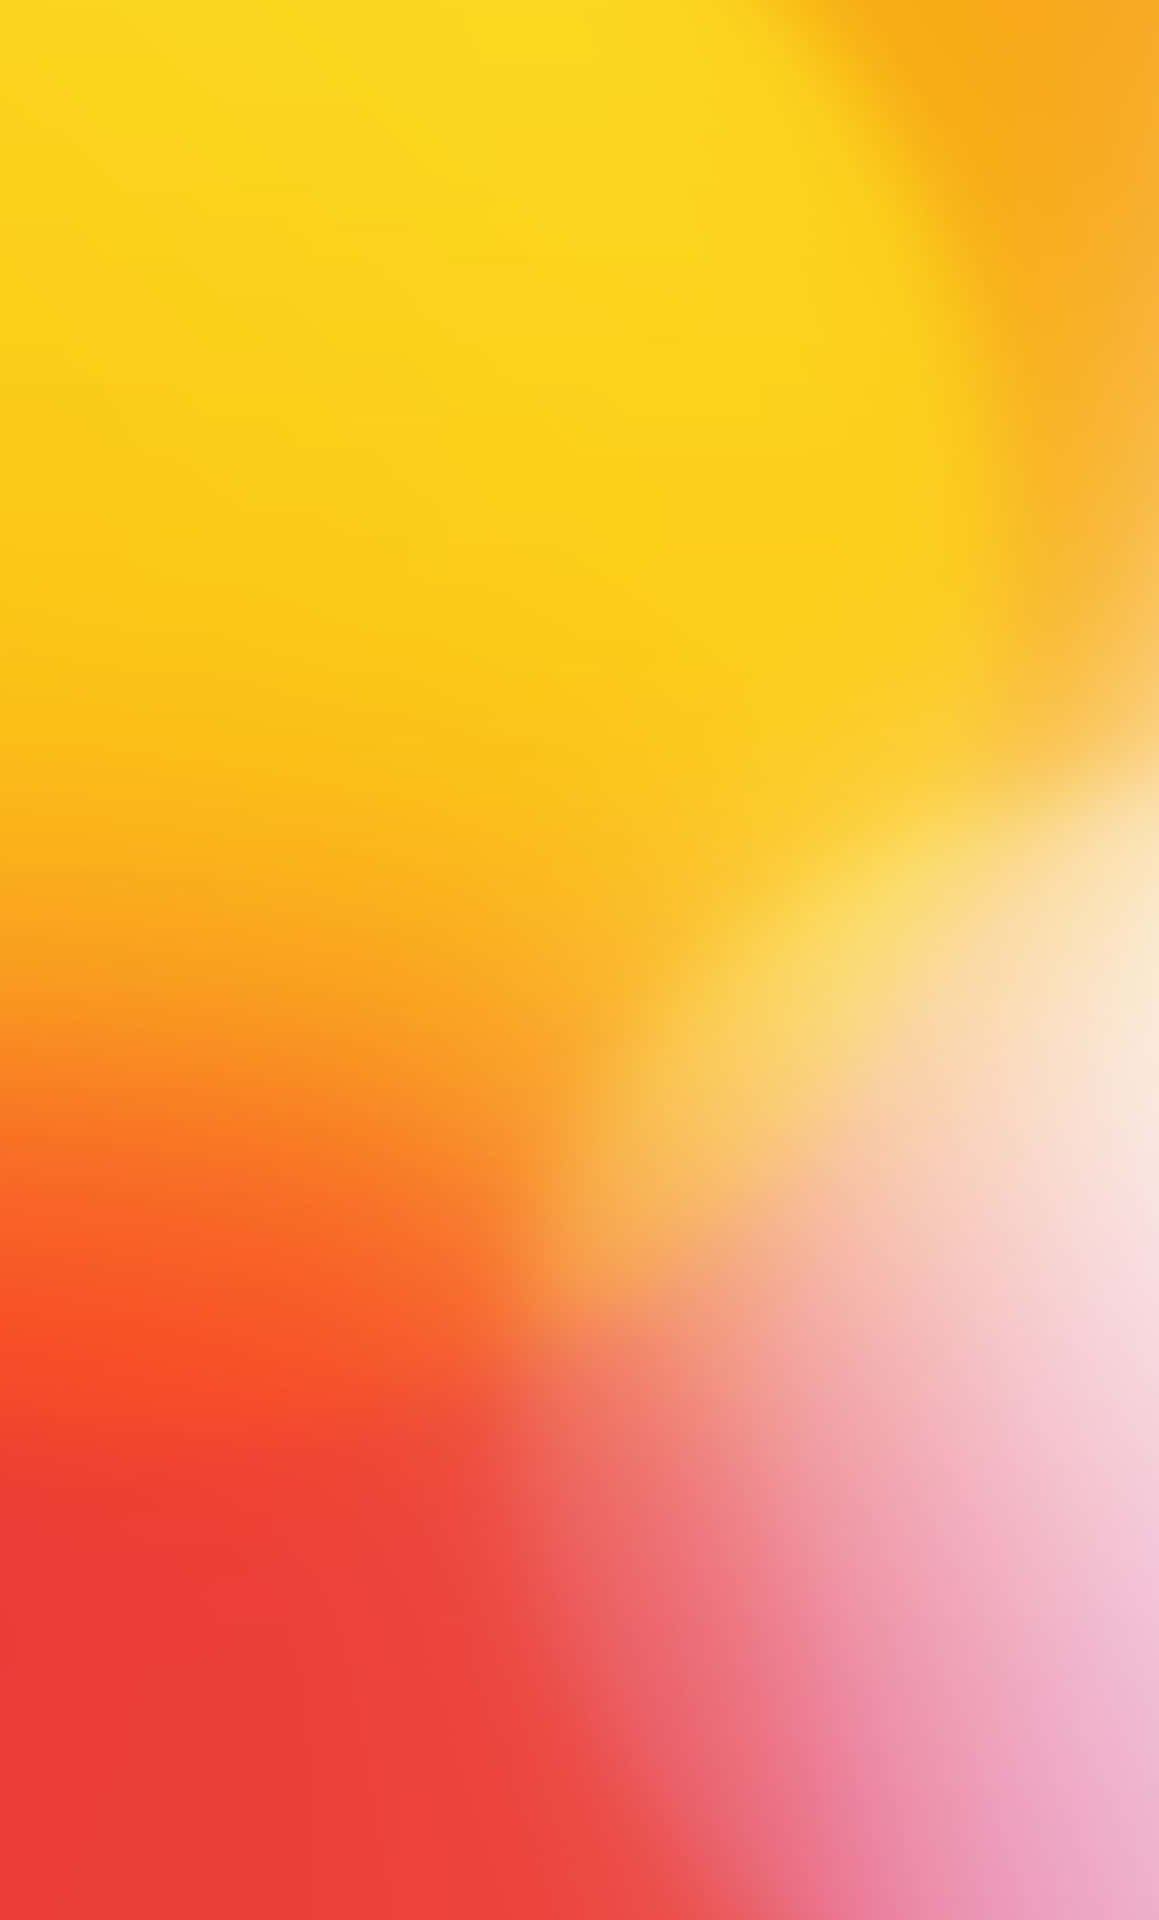 A Colorful Abstract Background With A Yellow, Orange, And Red Color